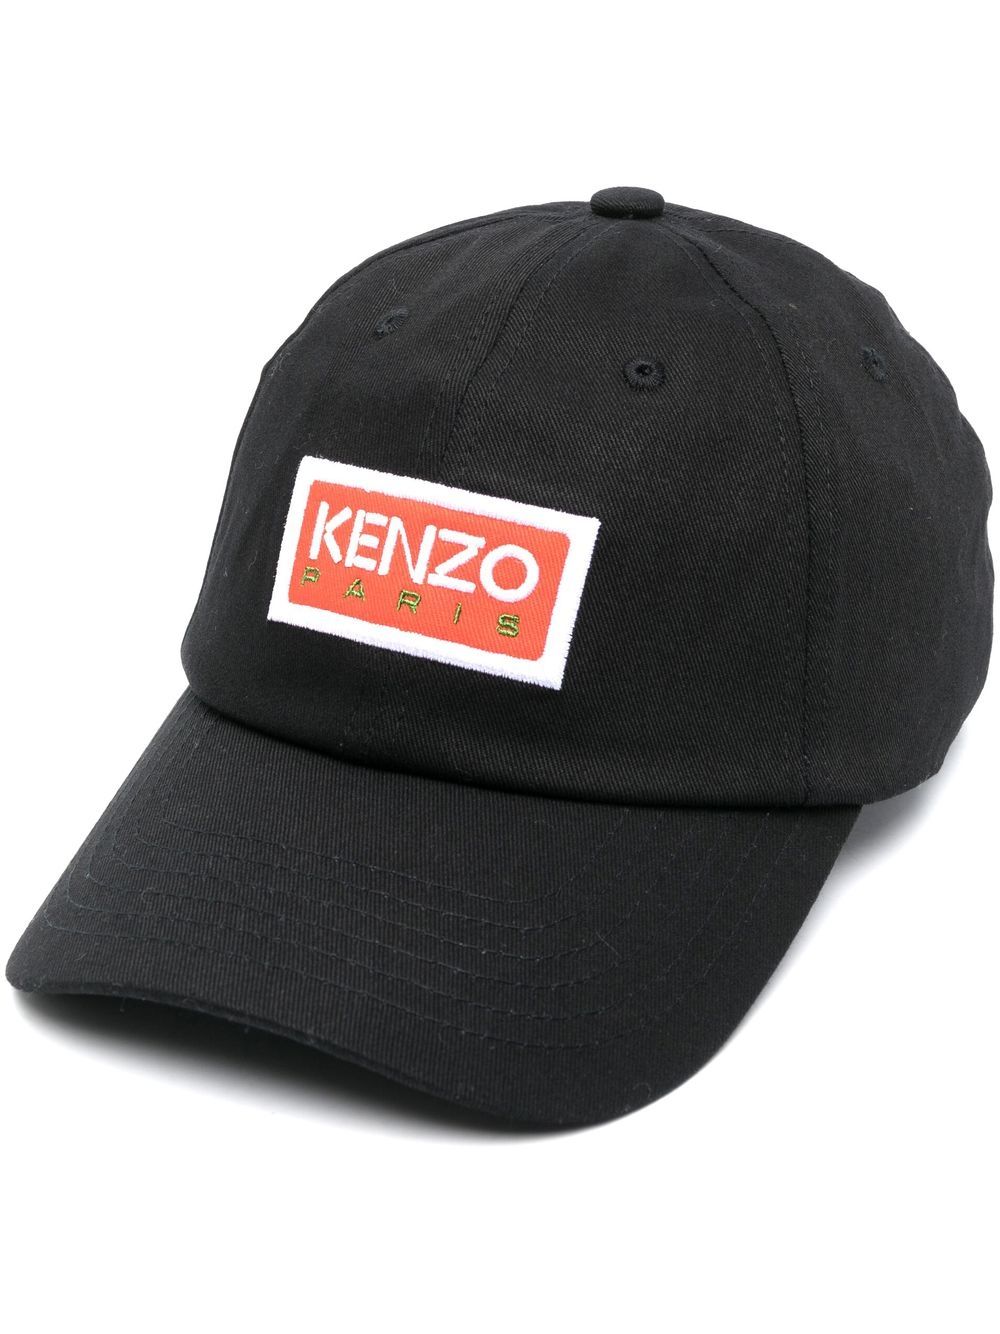 Kenzo Embroidered Hat in Black